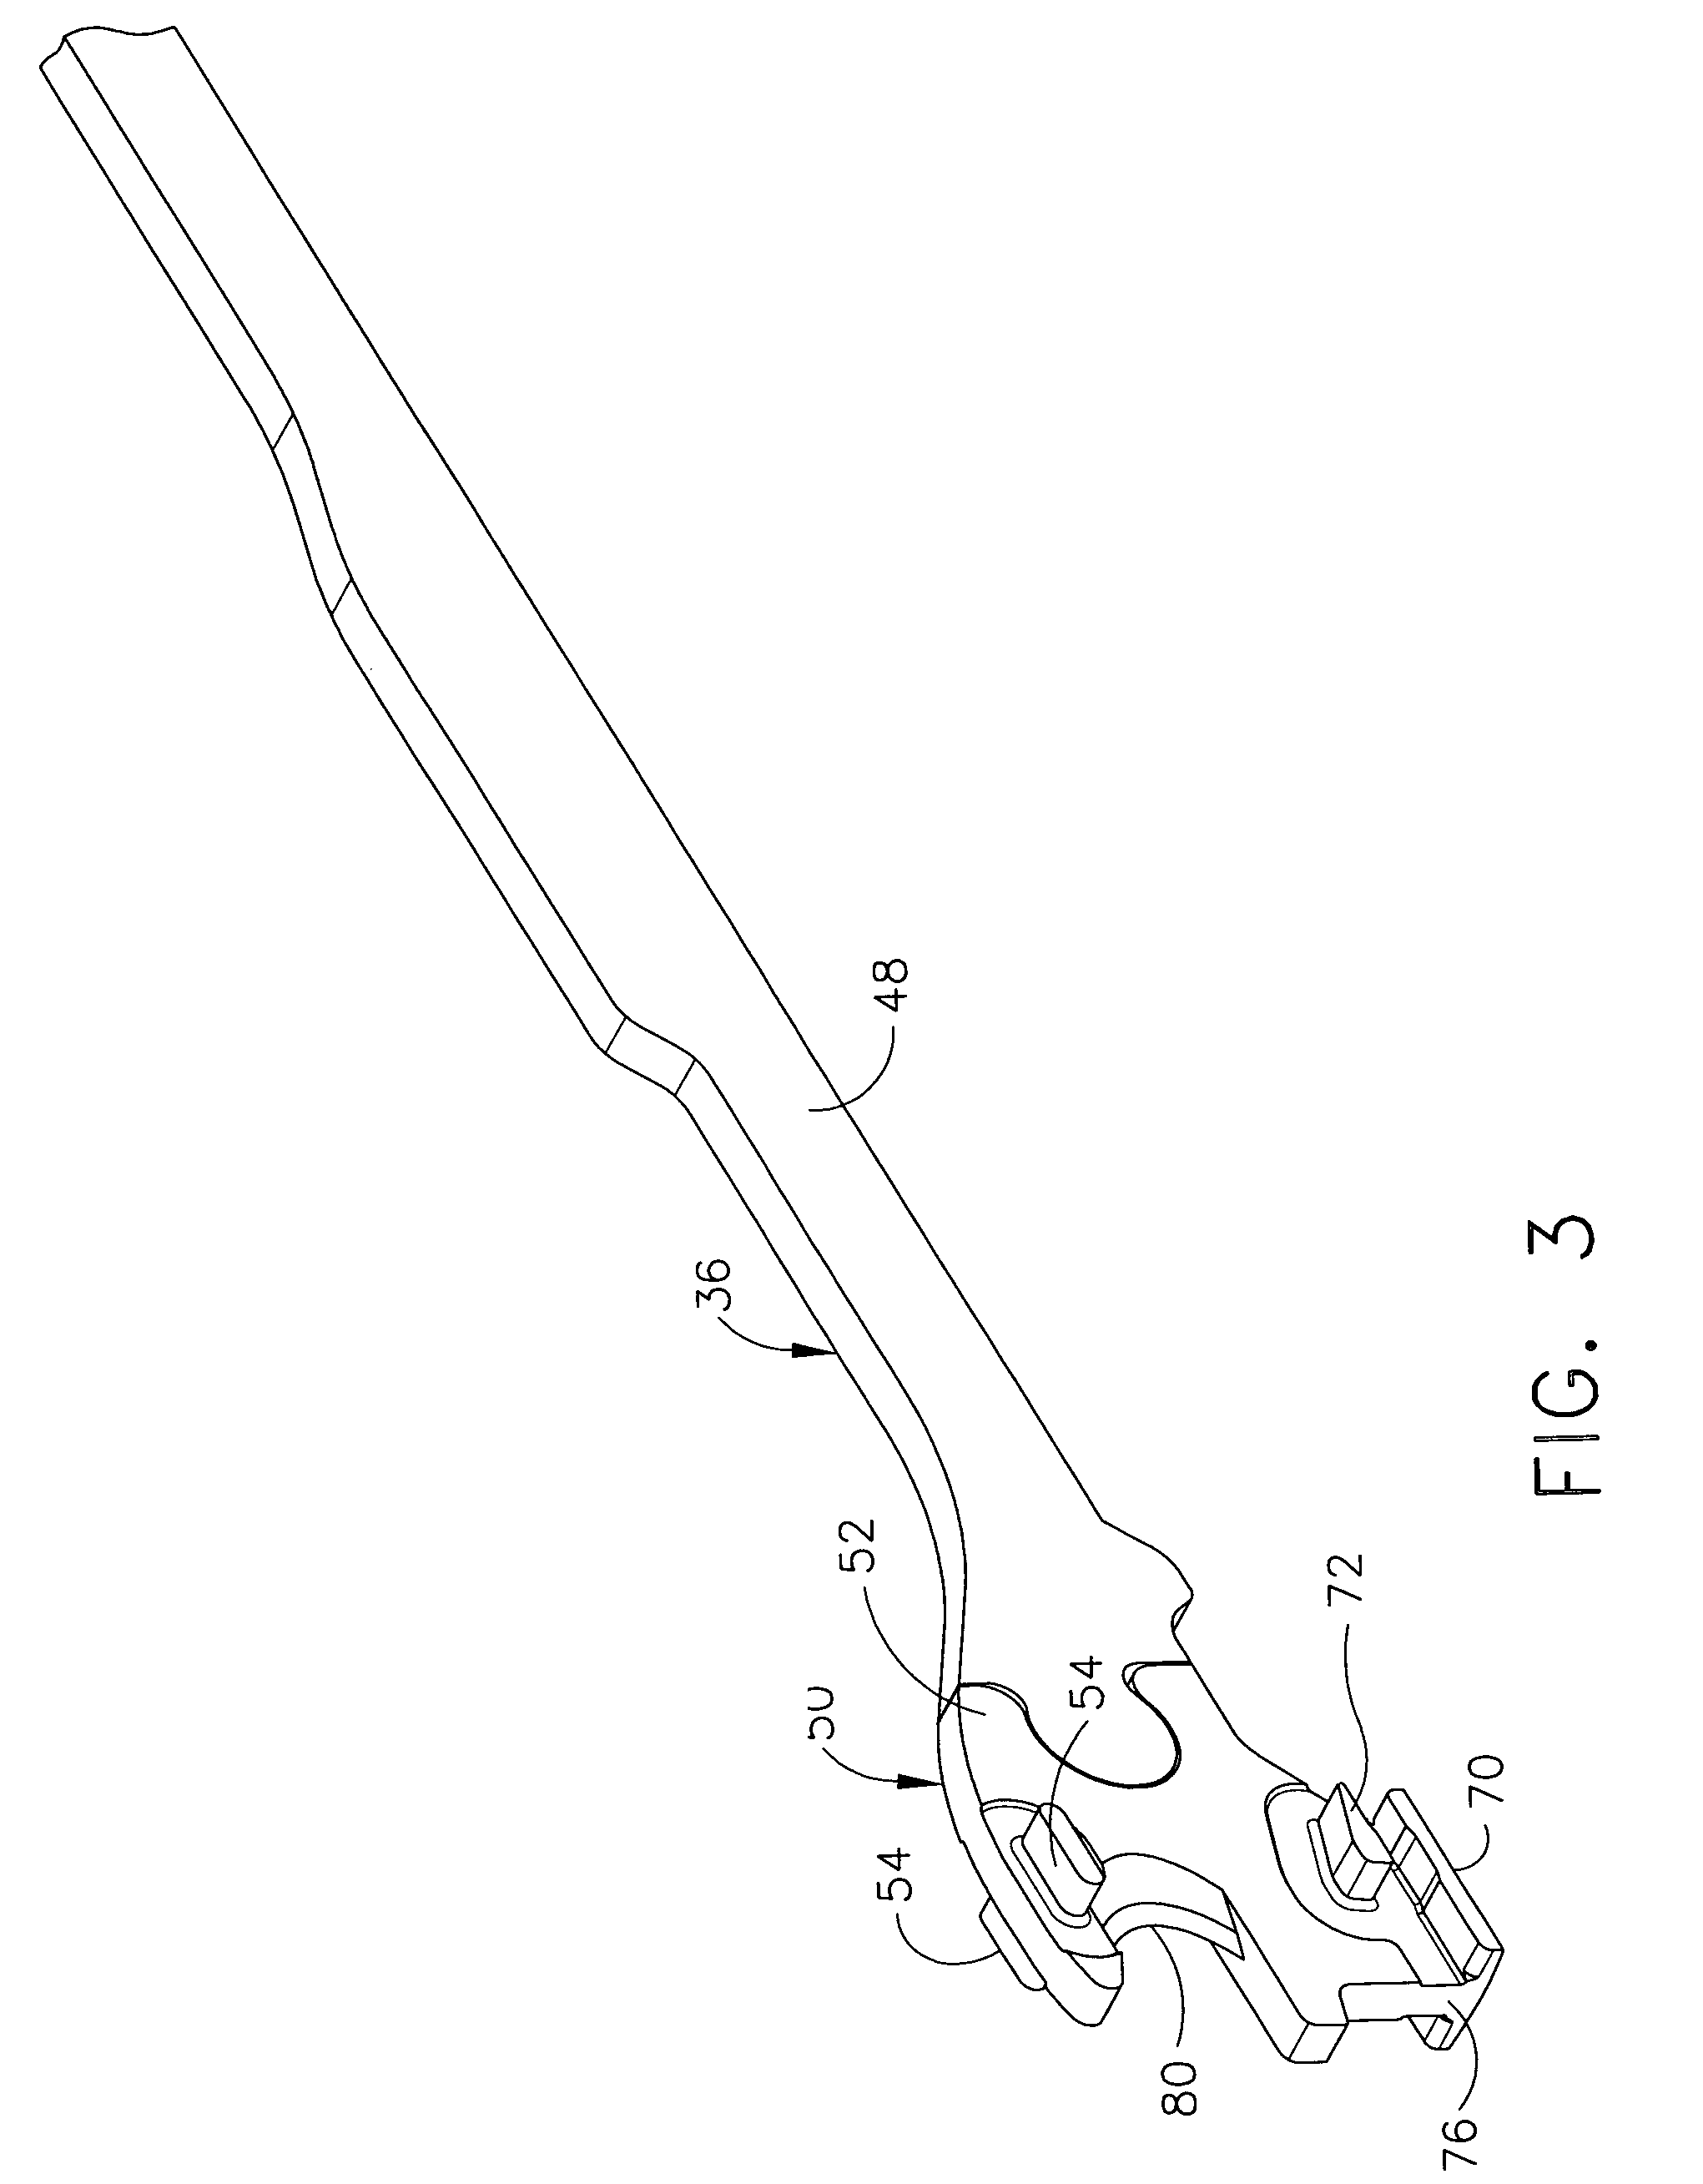 Surgical stapling instrument with mechanical mechanism for limiting maximum tissue compression